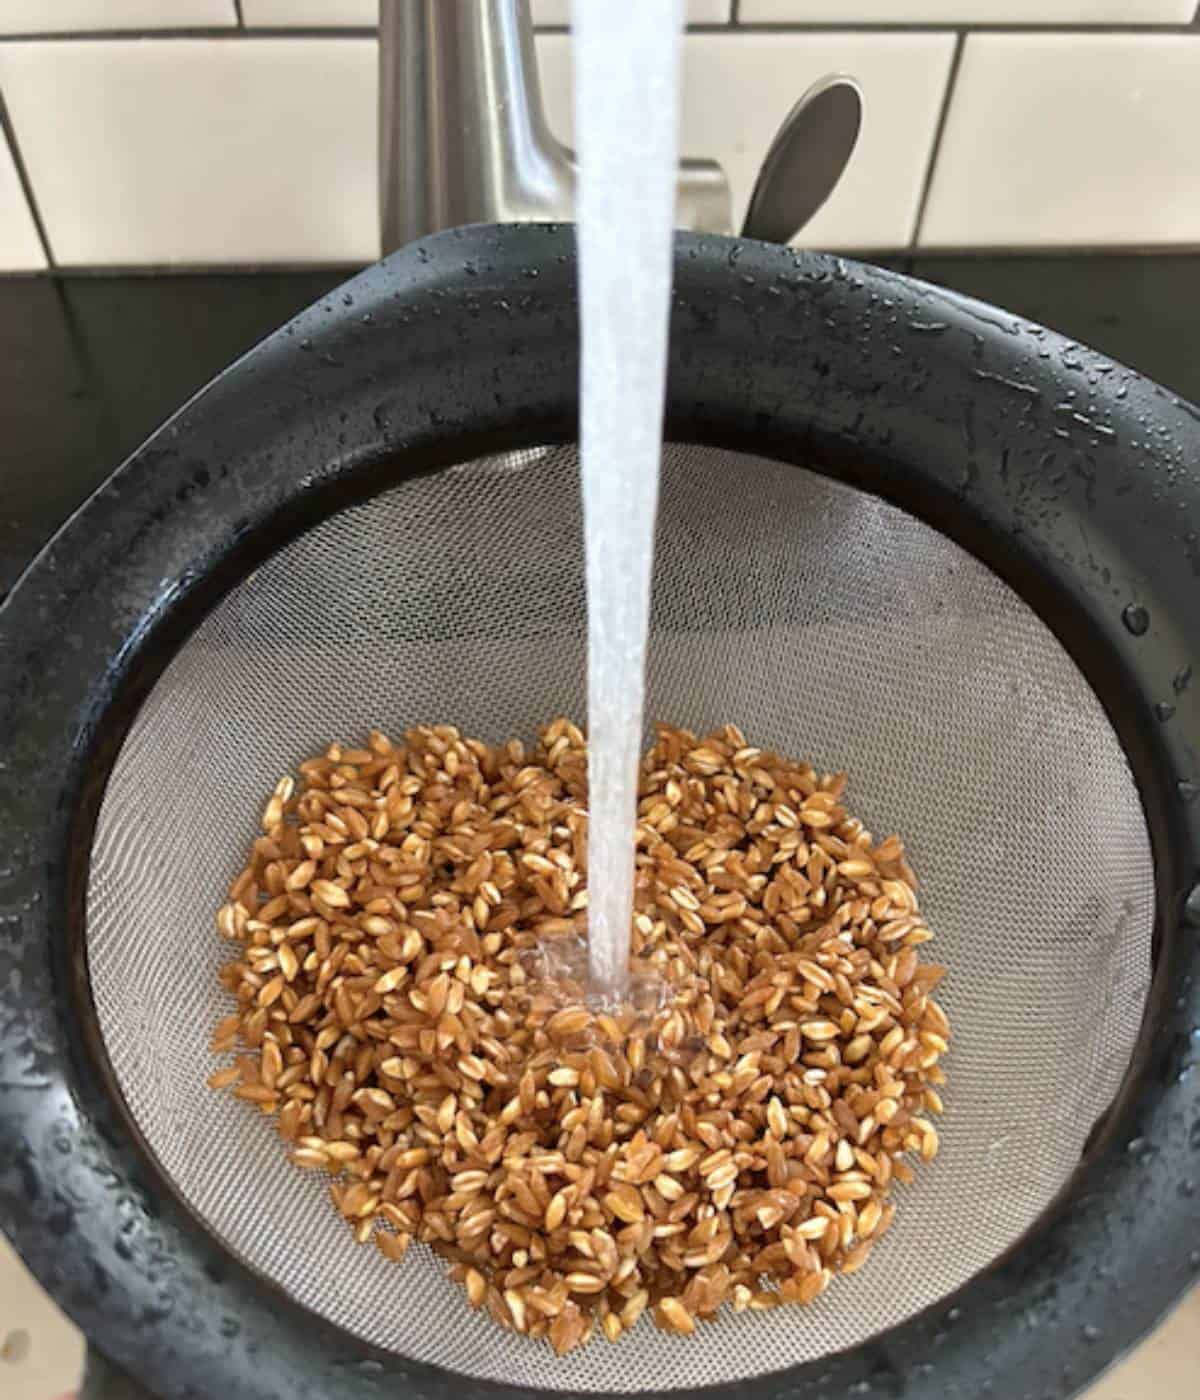 Farro in mesh strainer rinsing with water.